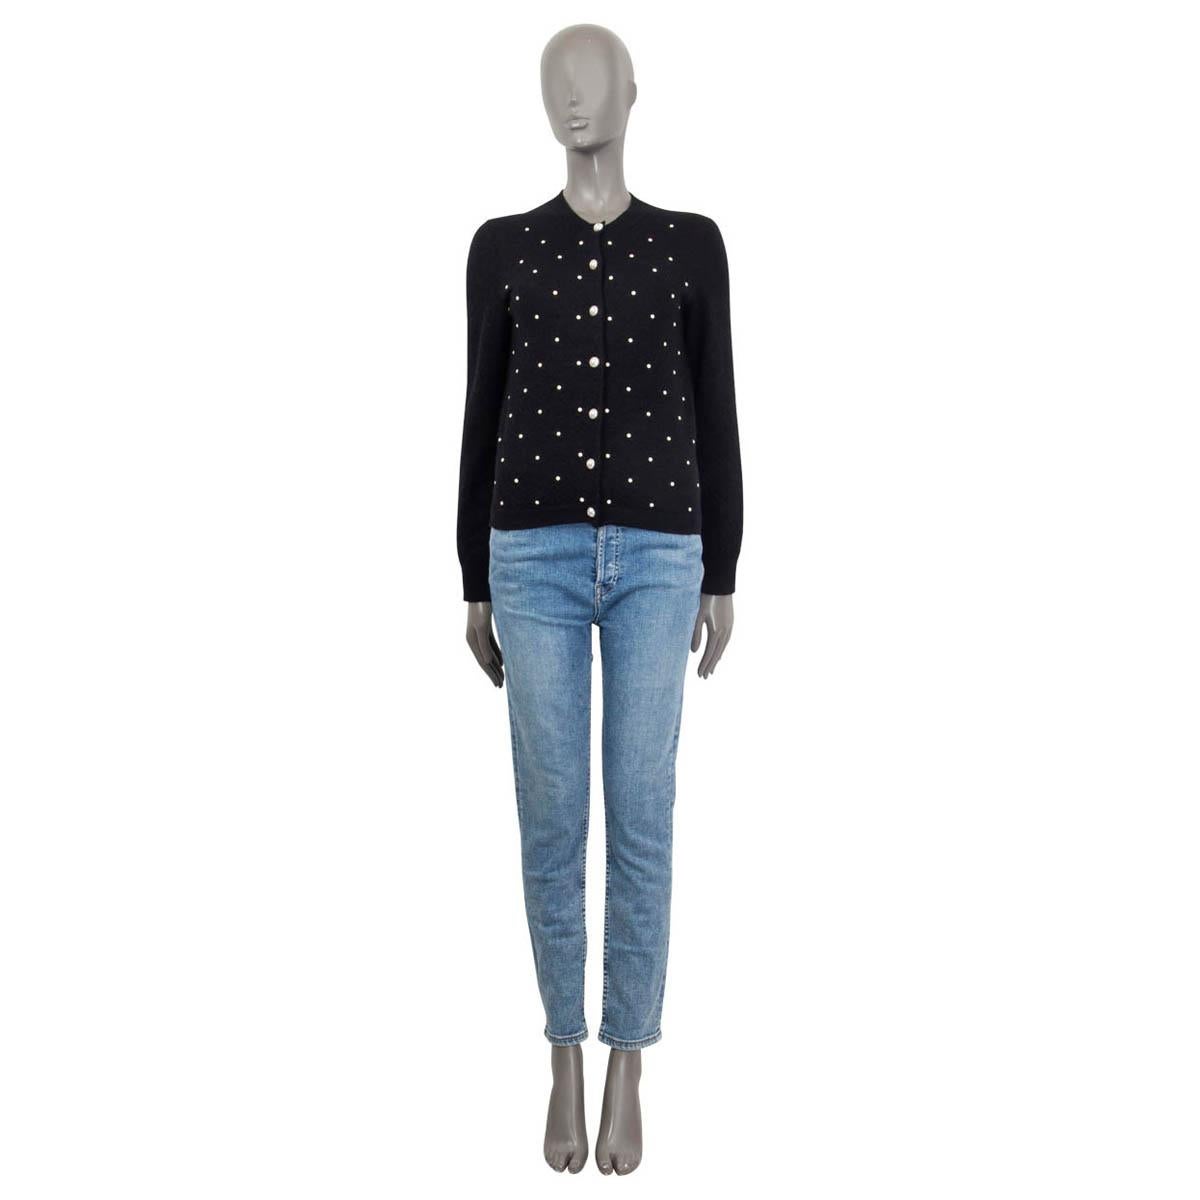 100% authentic Chanel pearl embellished cardigan in black mohair (70%) and cashmere (30%). Pre-Fall 2014 collection. Closes with pearl buttons on the front. Has been worn and is in excellent condition.

Measurements
Tag Size	38
Size	S
Shoulder